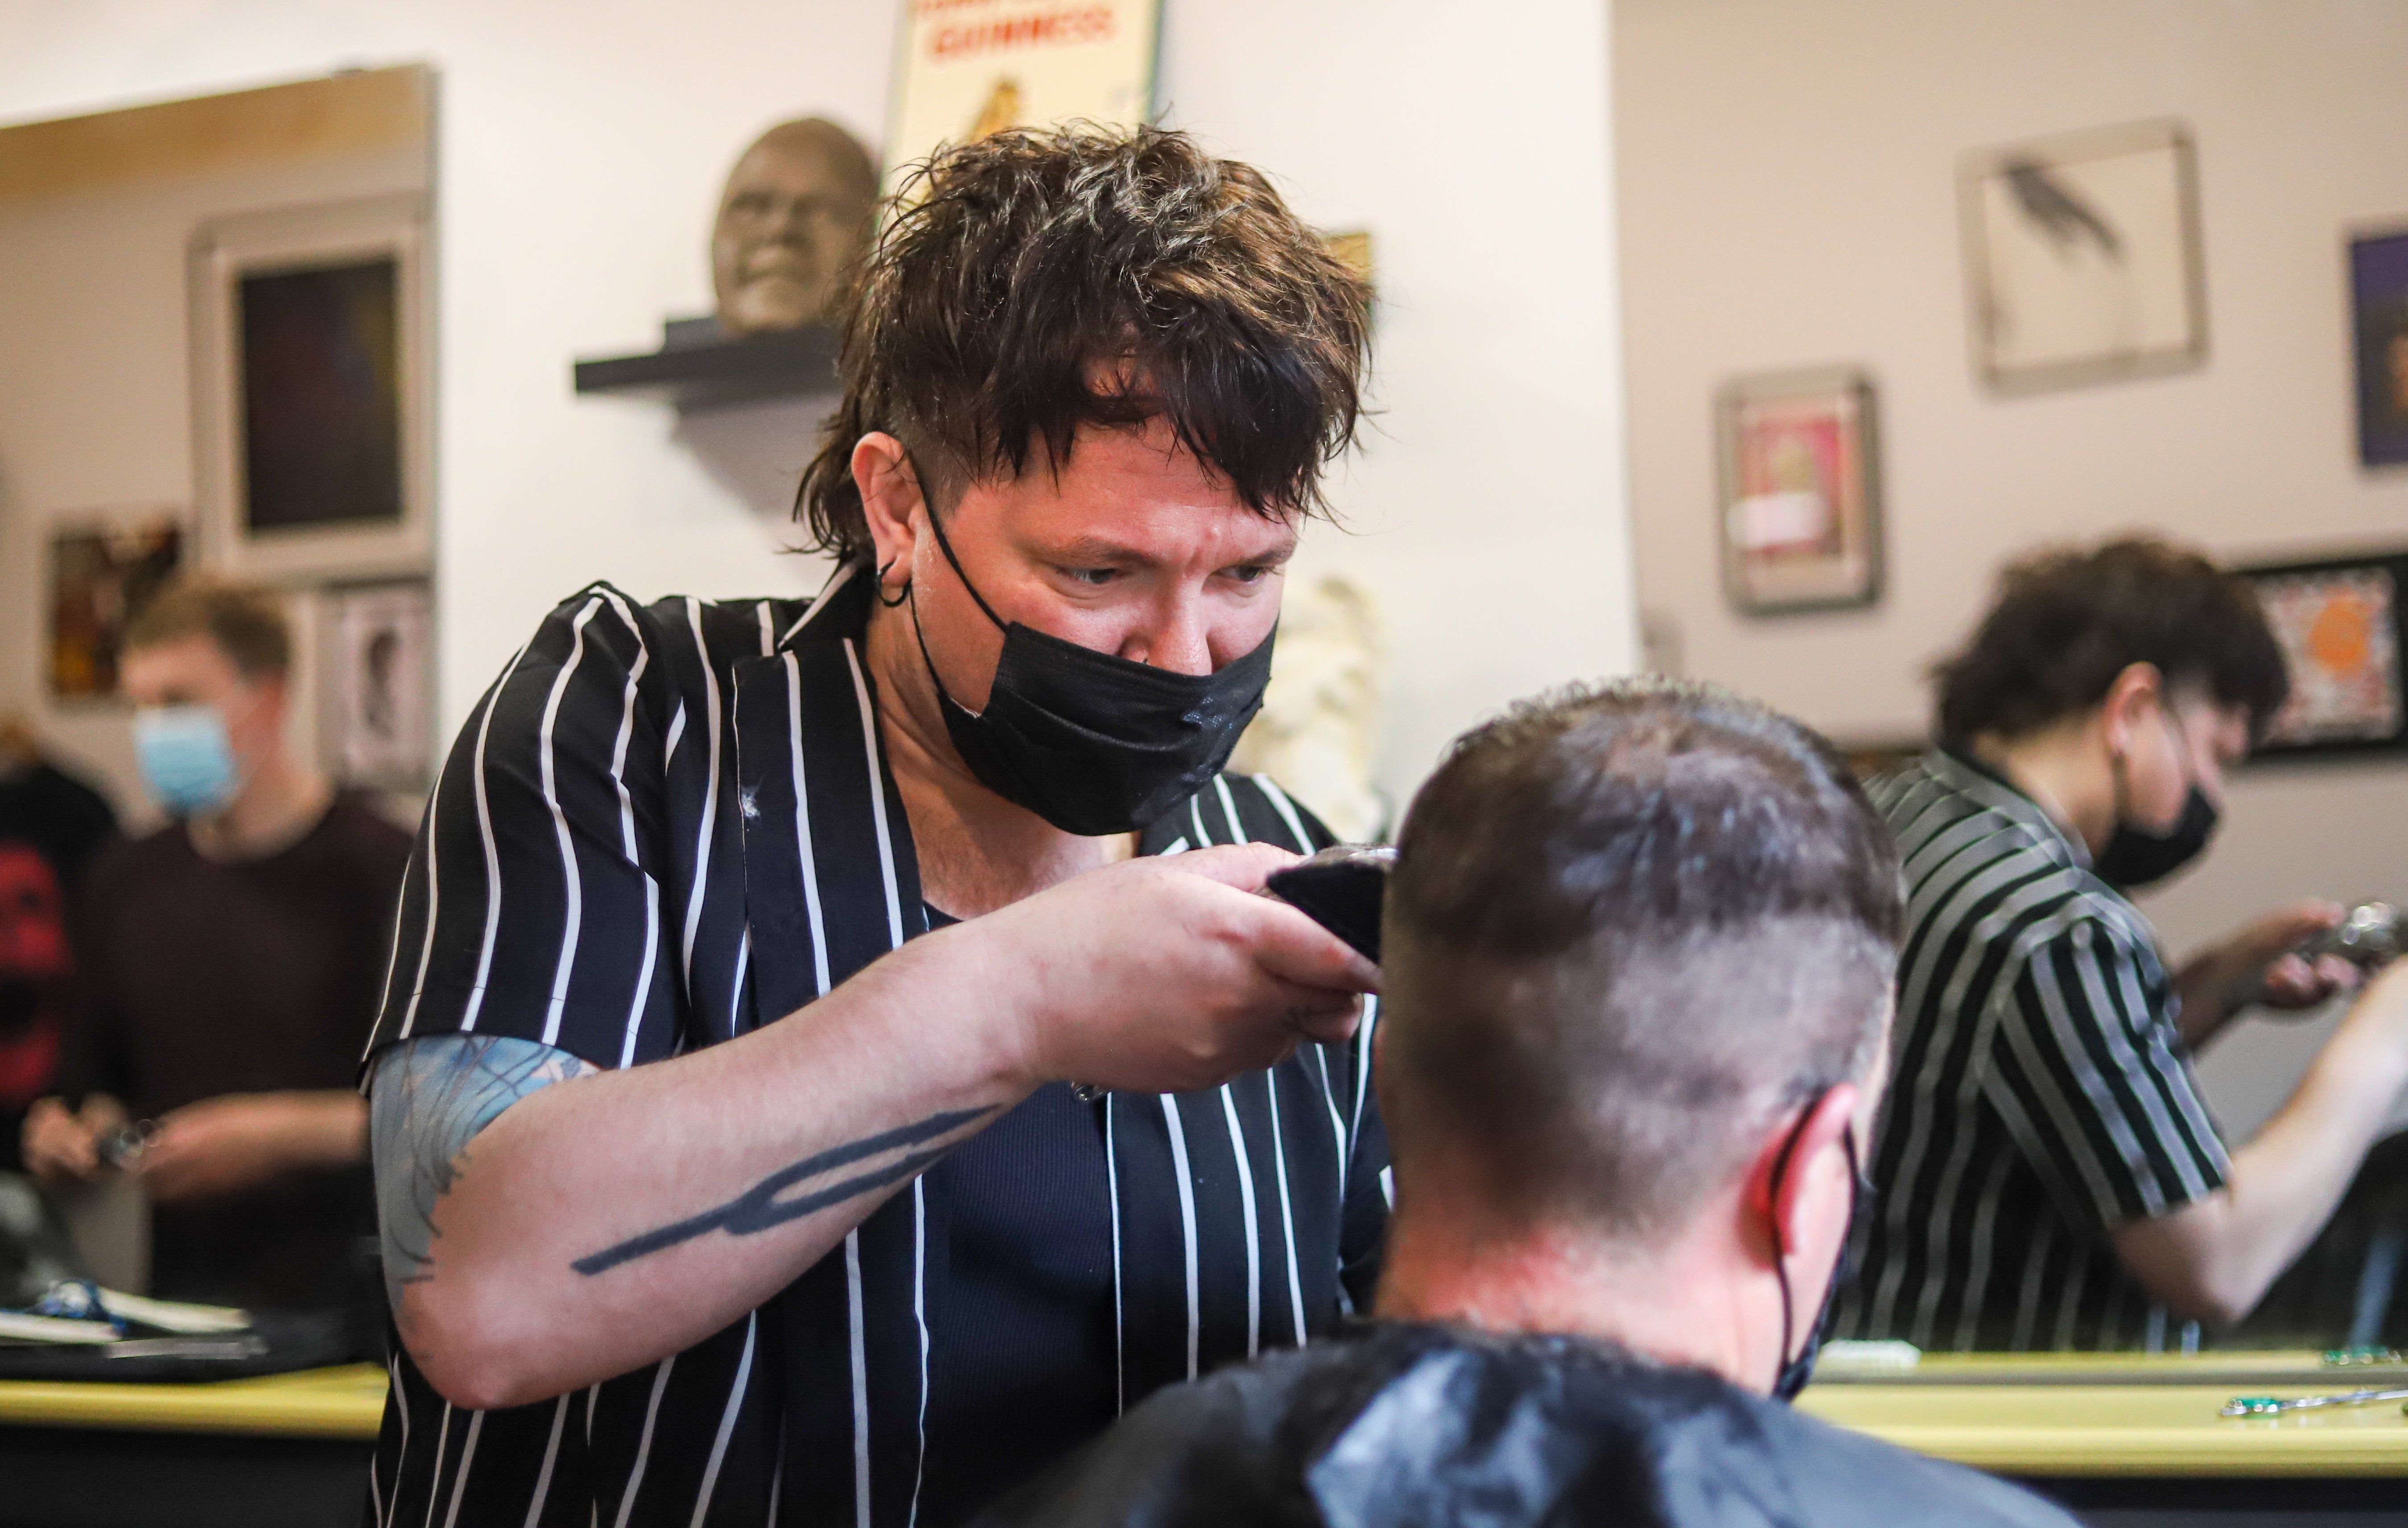 Hairdressers and other consumer service businesses might see headcount fall in the next few months (Damien Storan/PA)